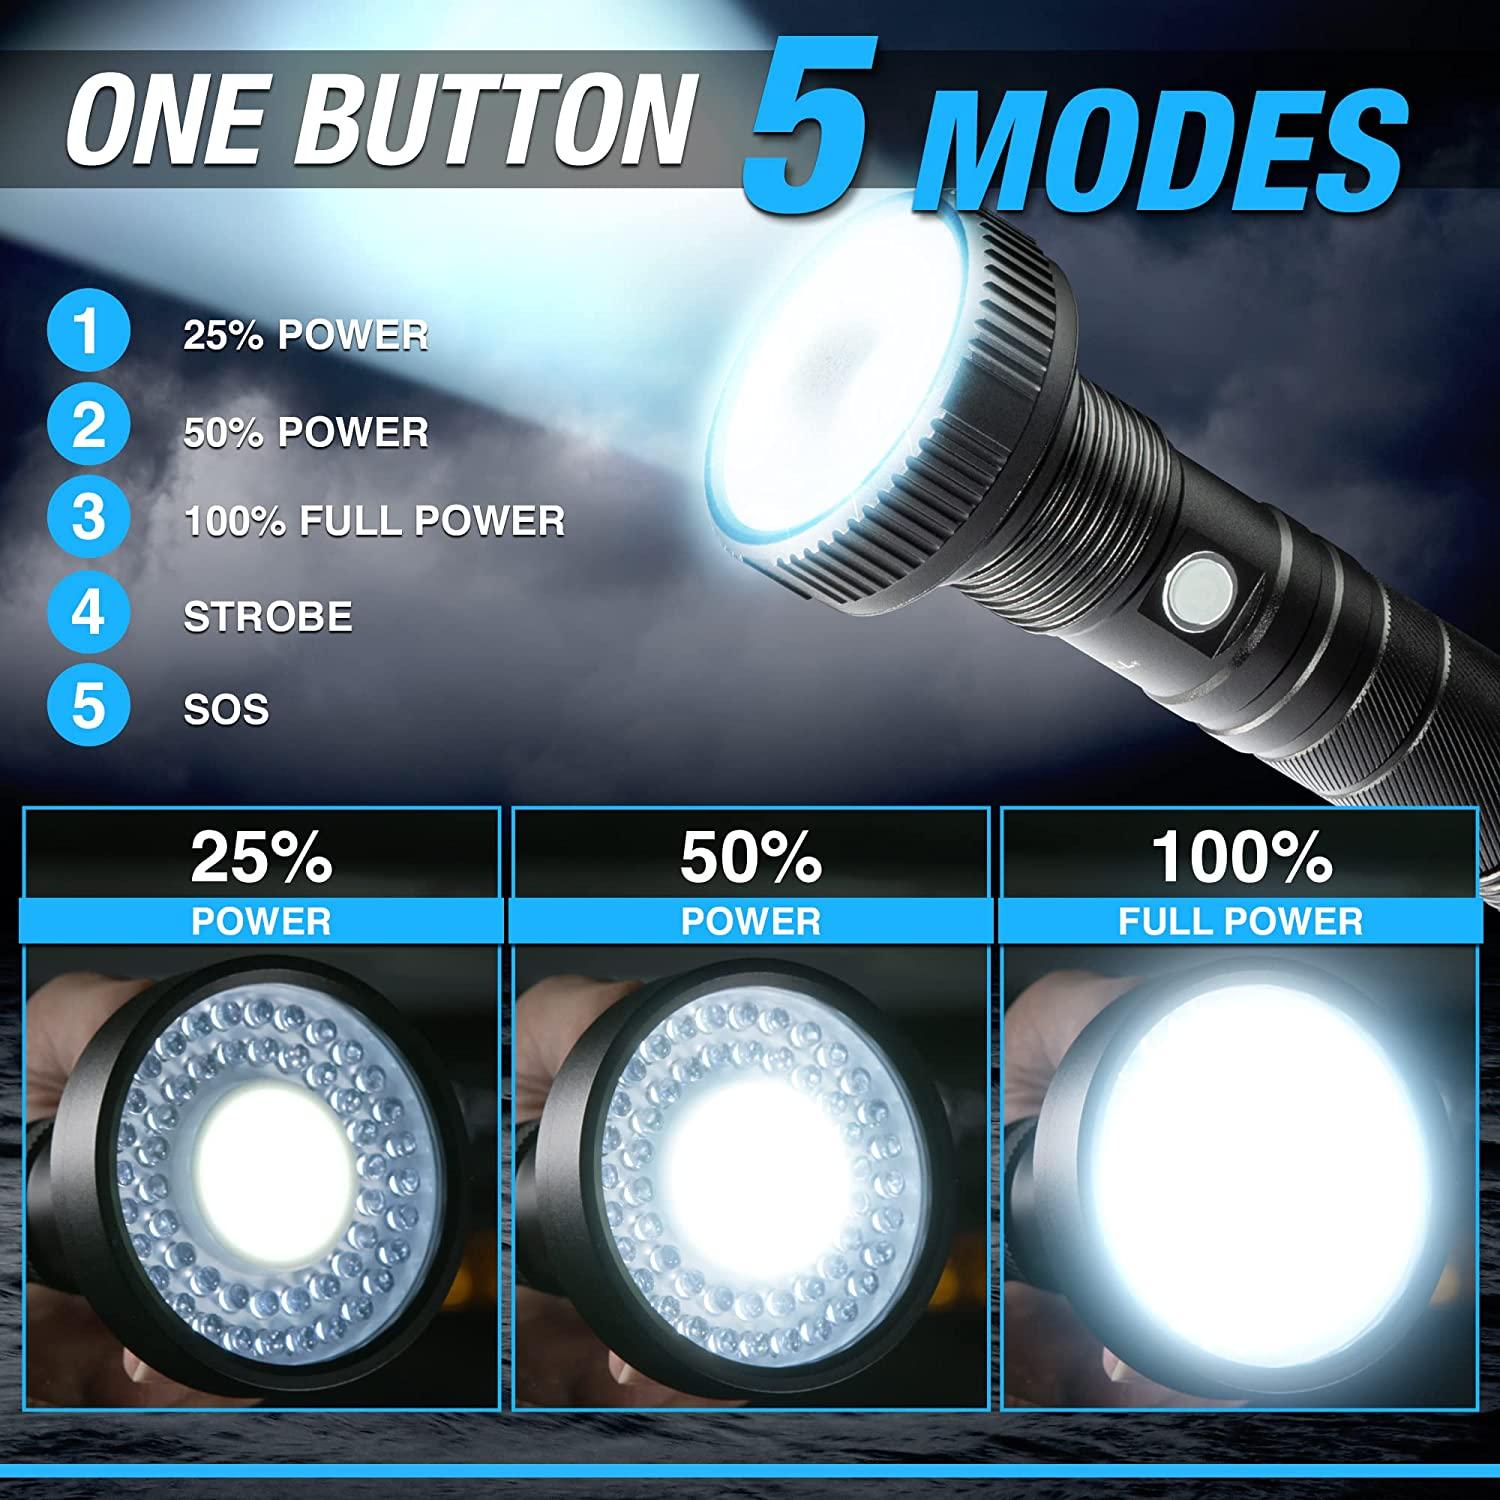 Bell+Howell Taclight Max Ultra High-Powered Long-Lasting Up to 15 Hours  Handheld Flashlight 500 Lumens-7,000K Cree LED, 5 Modes, Rechargeable,  Water/Shatter Resistant Outdoor and Camping Flash Light